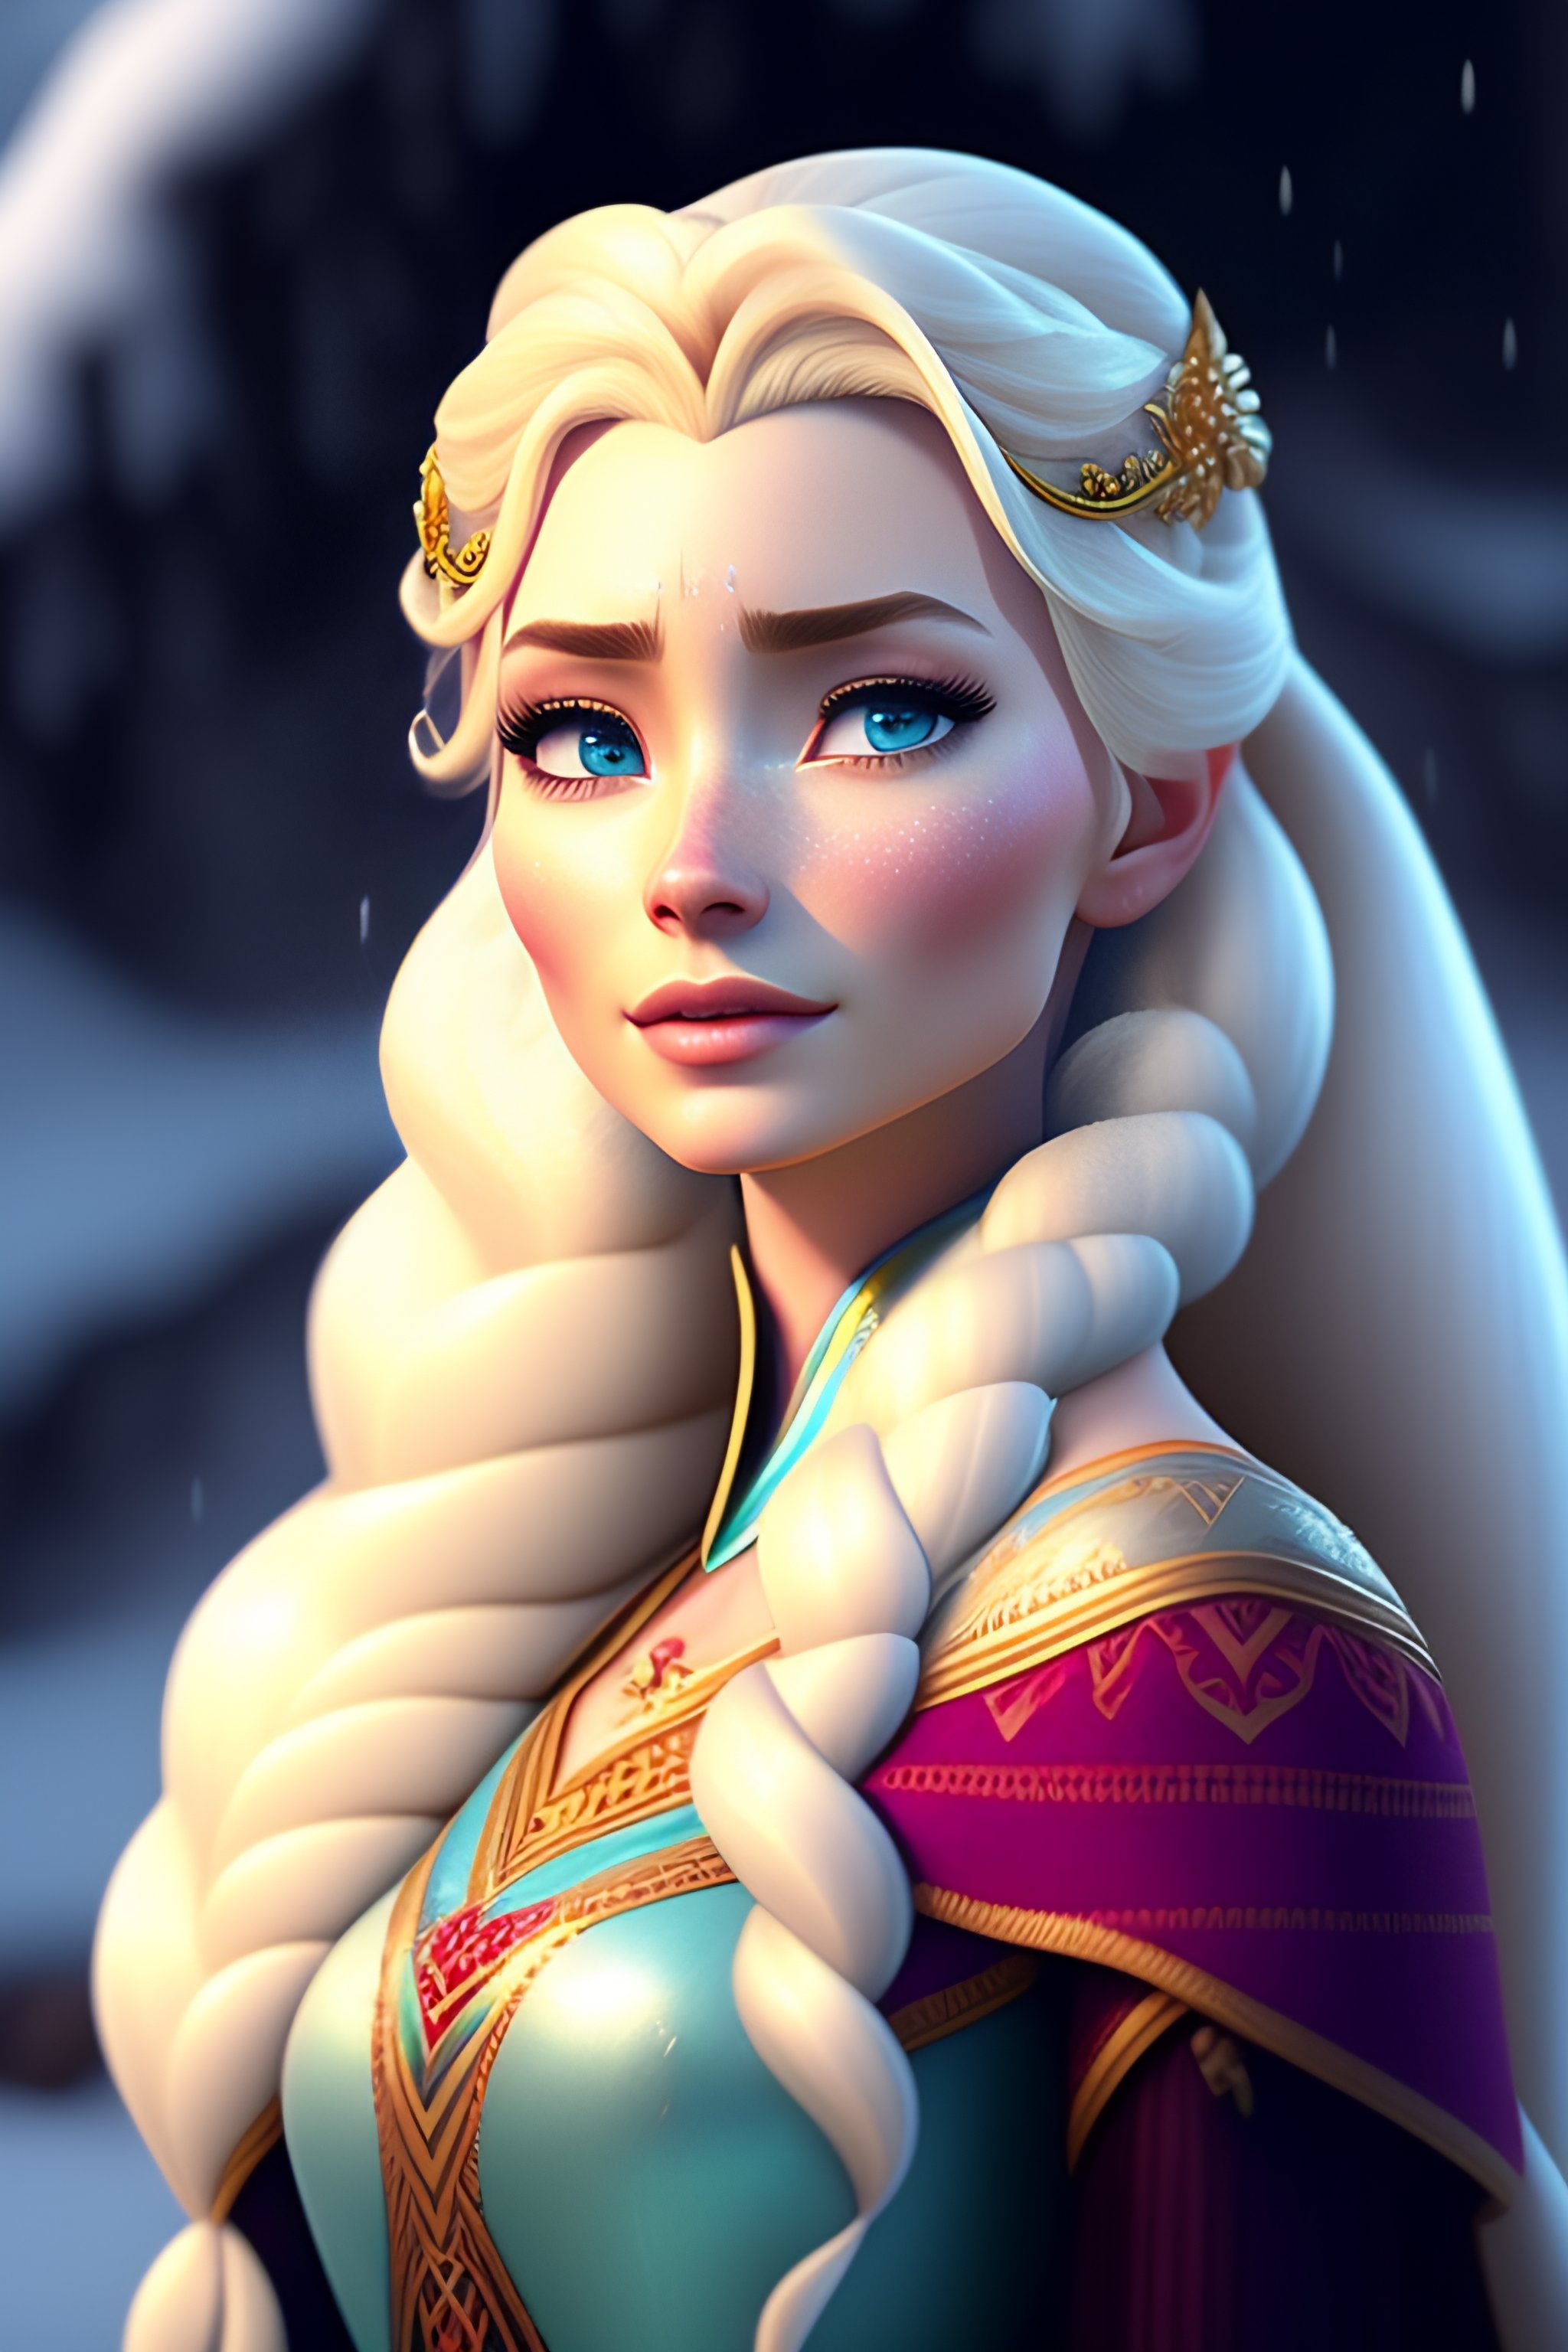 Lexica - Beautiful yung women, Elsa from frozen, eyes closed dramatic pose